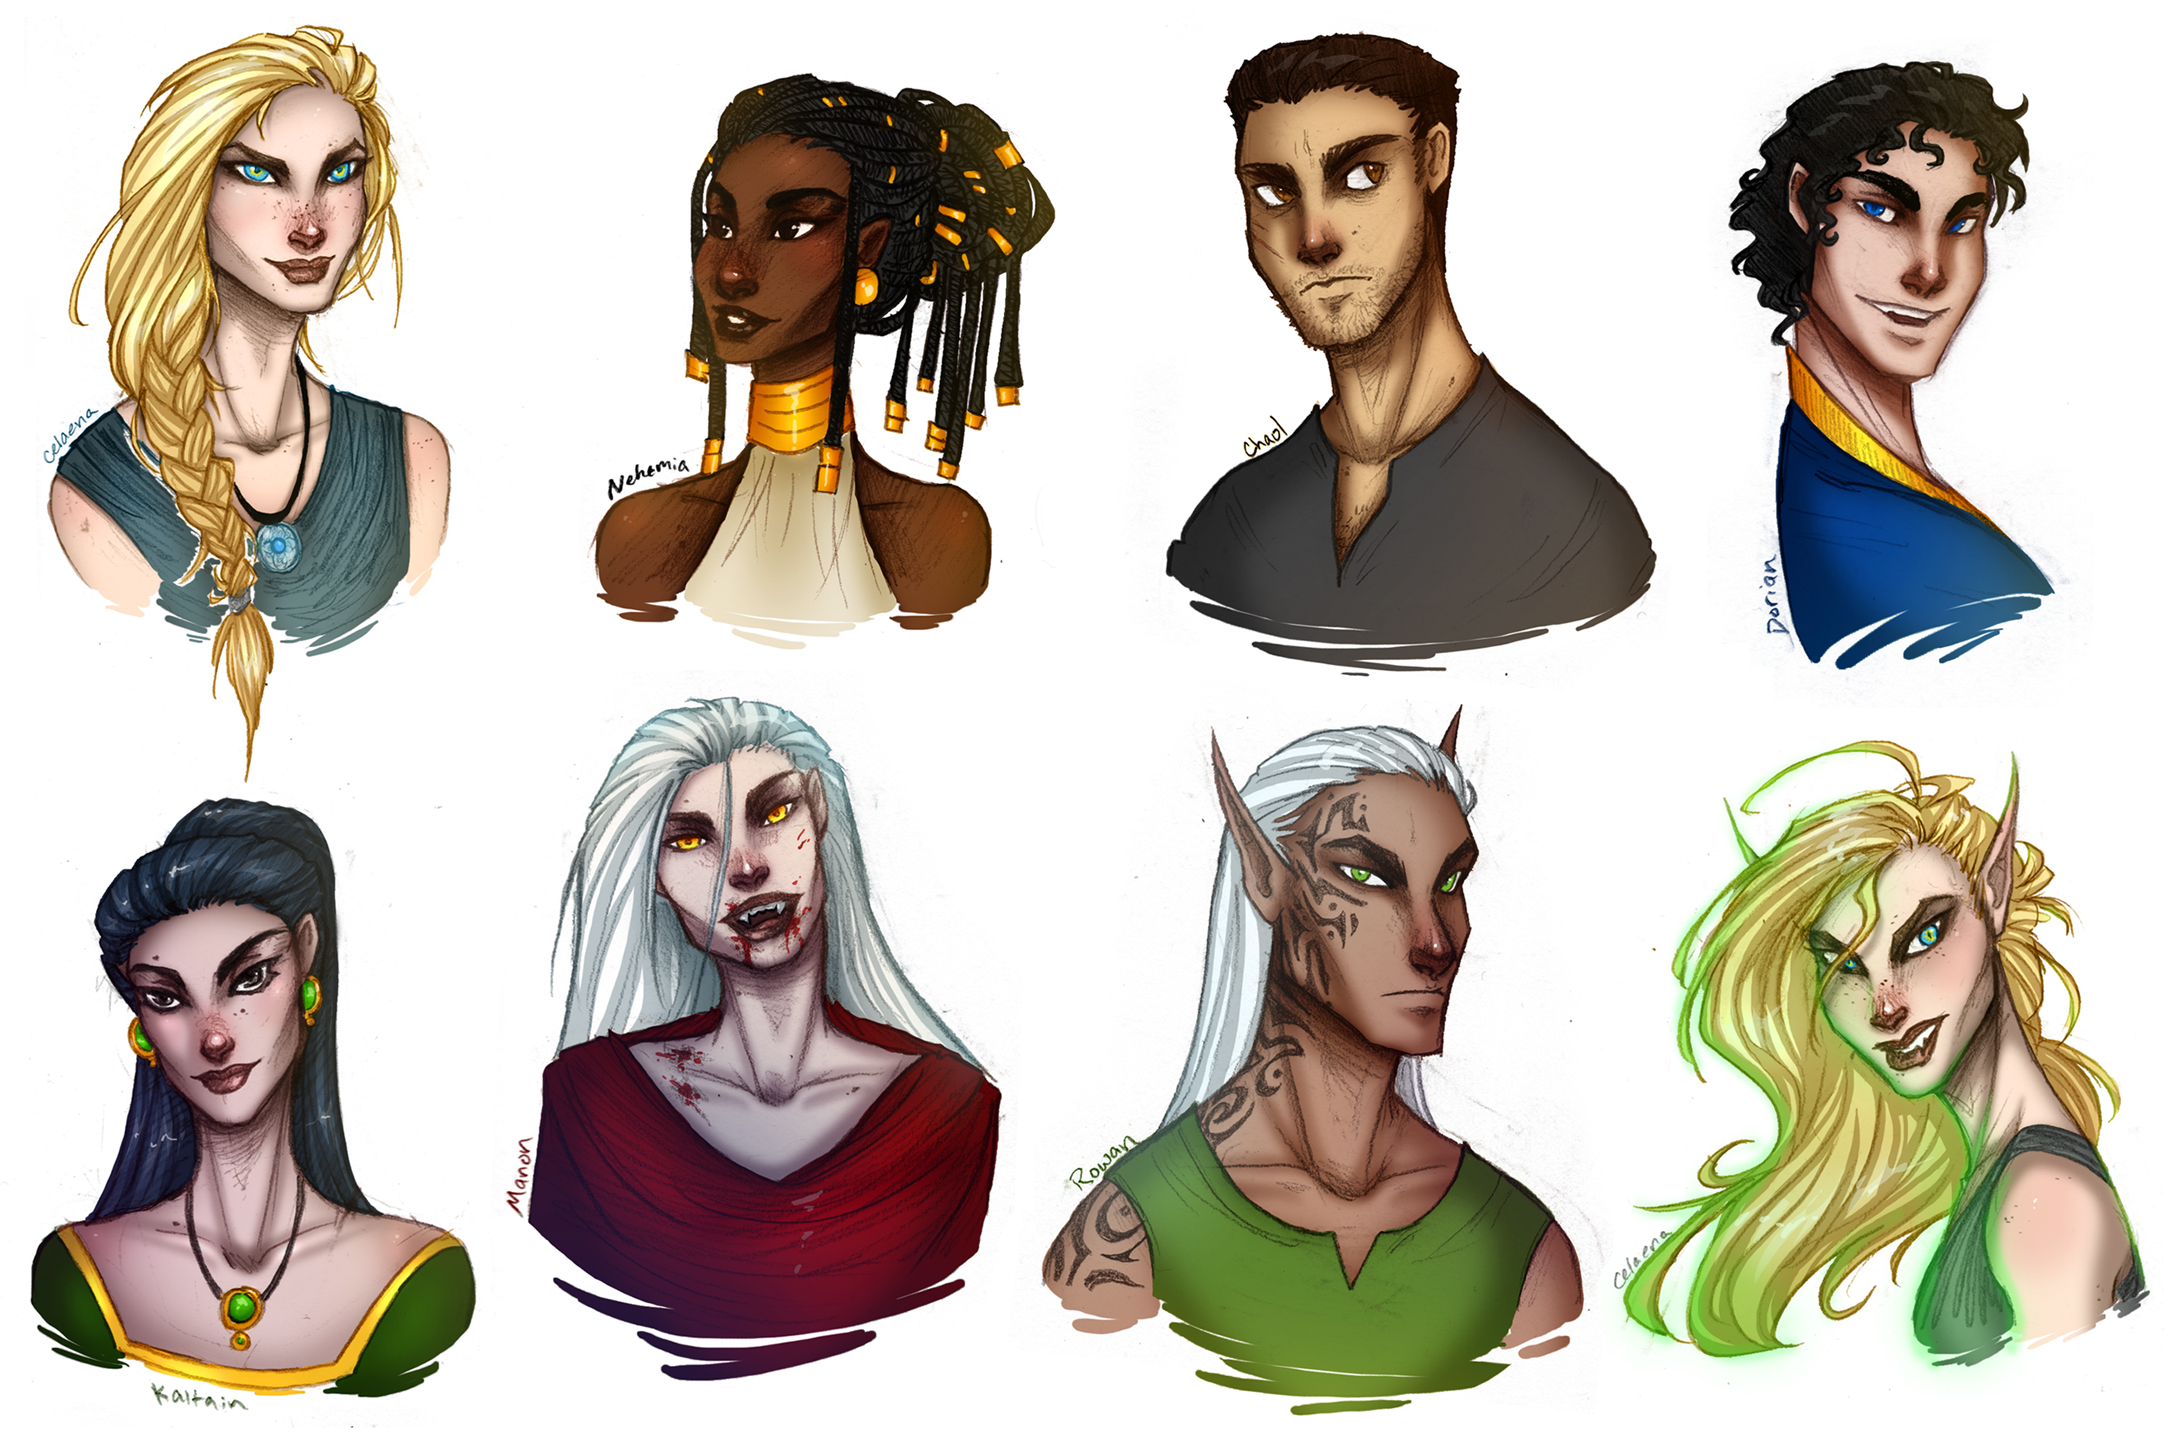 dump Kanon Gamle tider Throne of Glass - character doodles by ScillaVega on DeviantArt